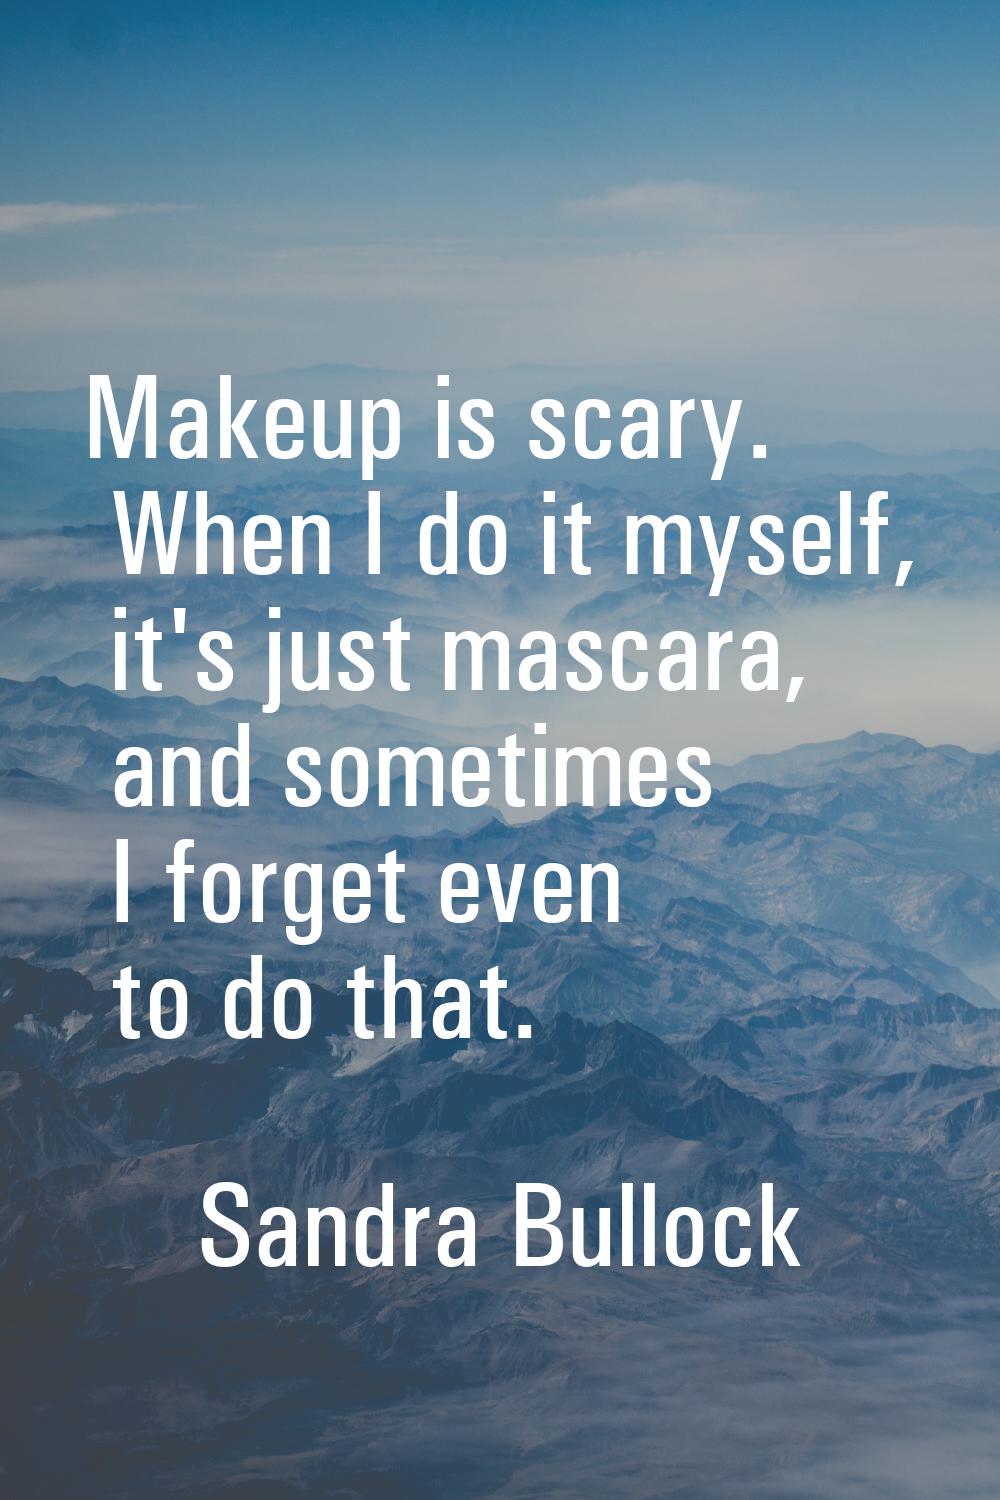 Makeup is scary. When I do it myself, it's just mascara, and sometimes I forget even to do that.